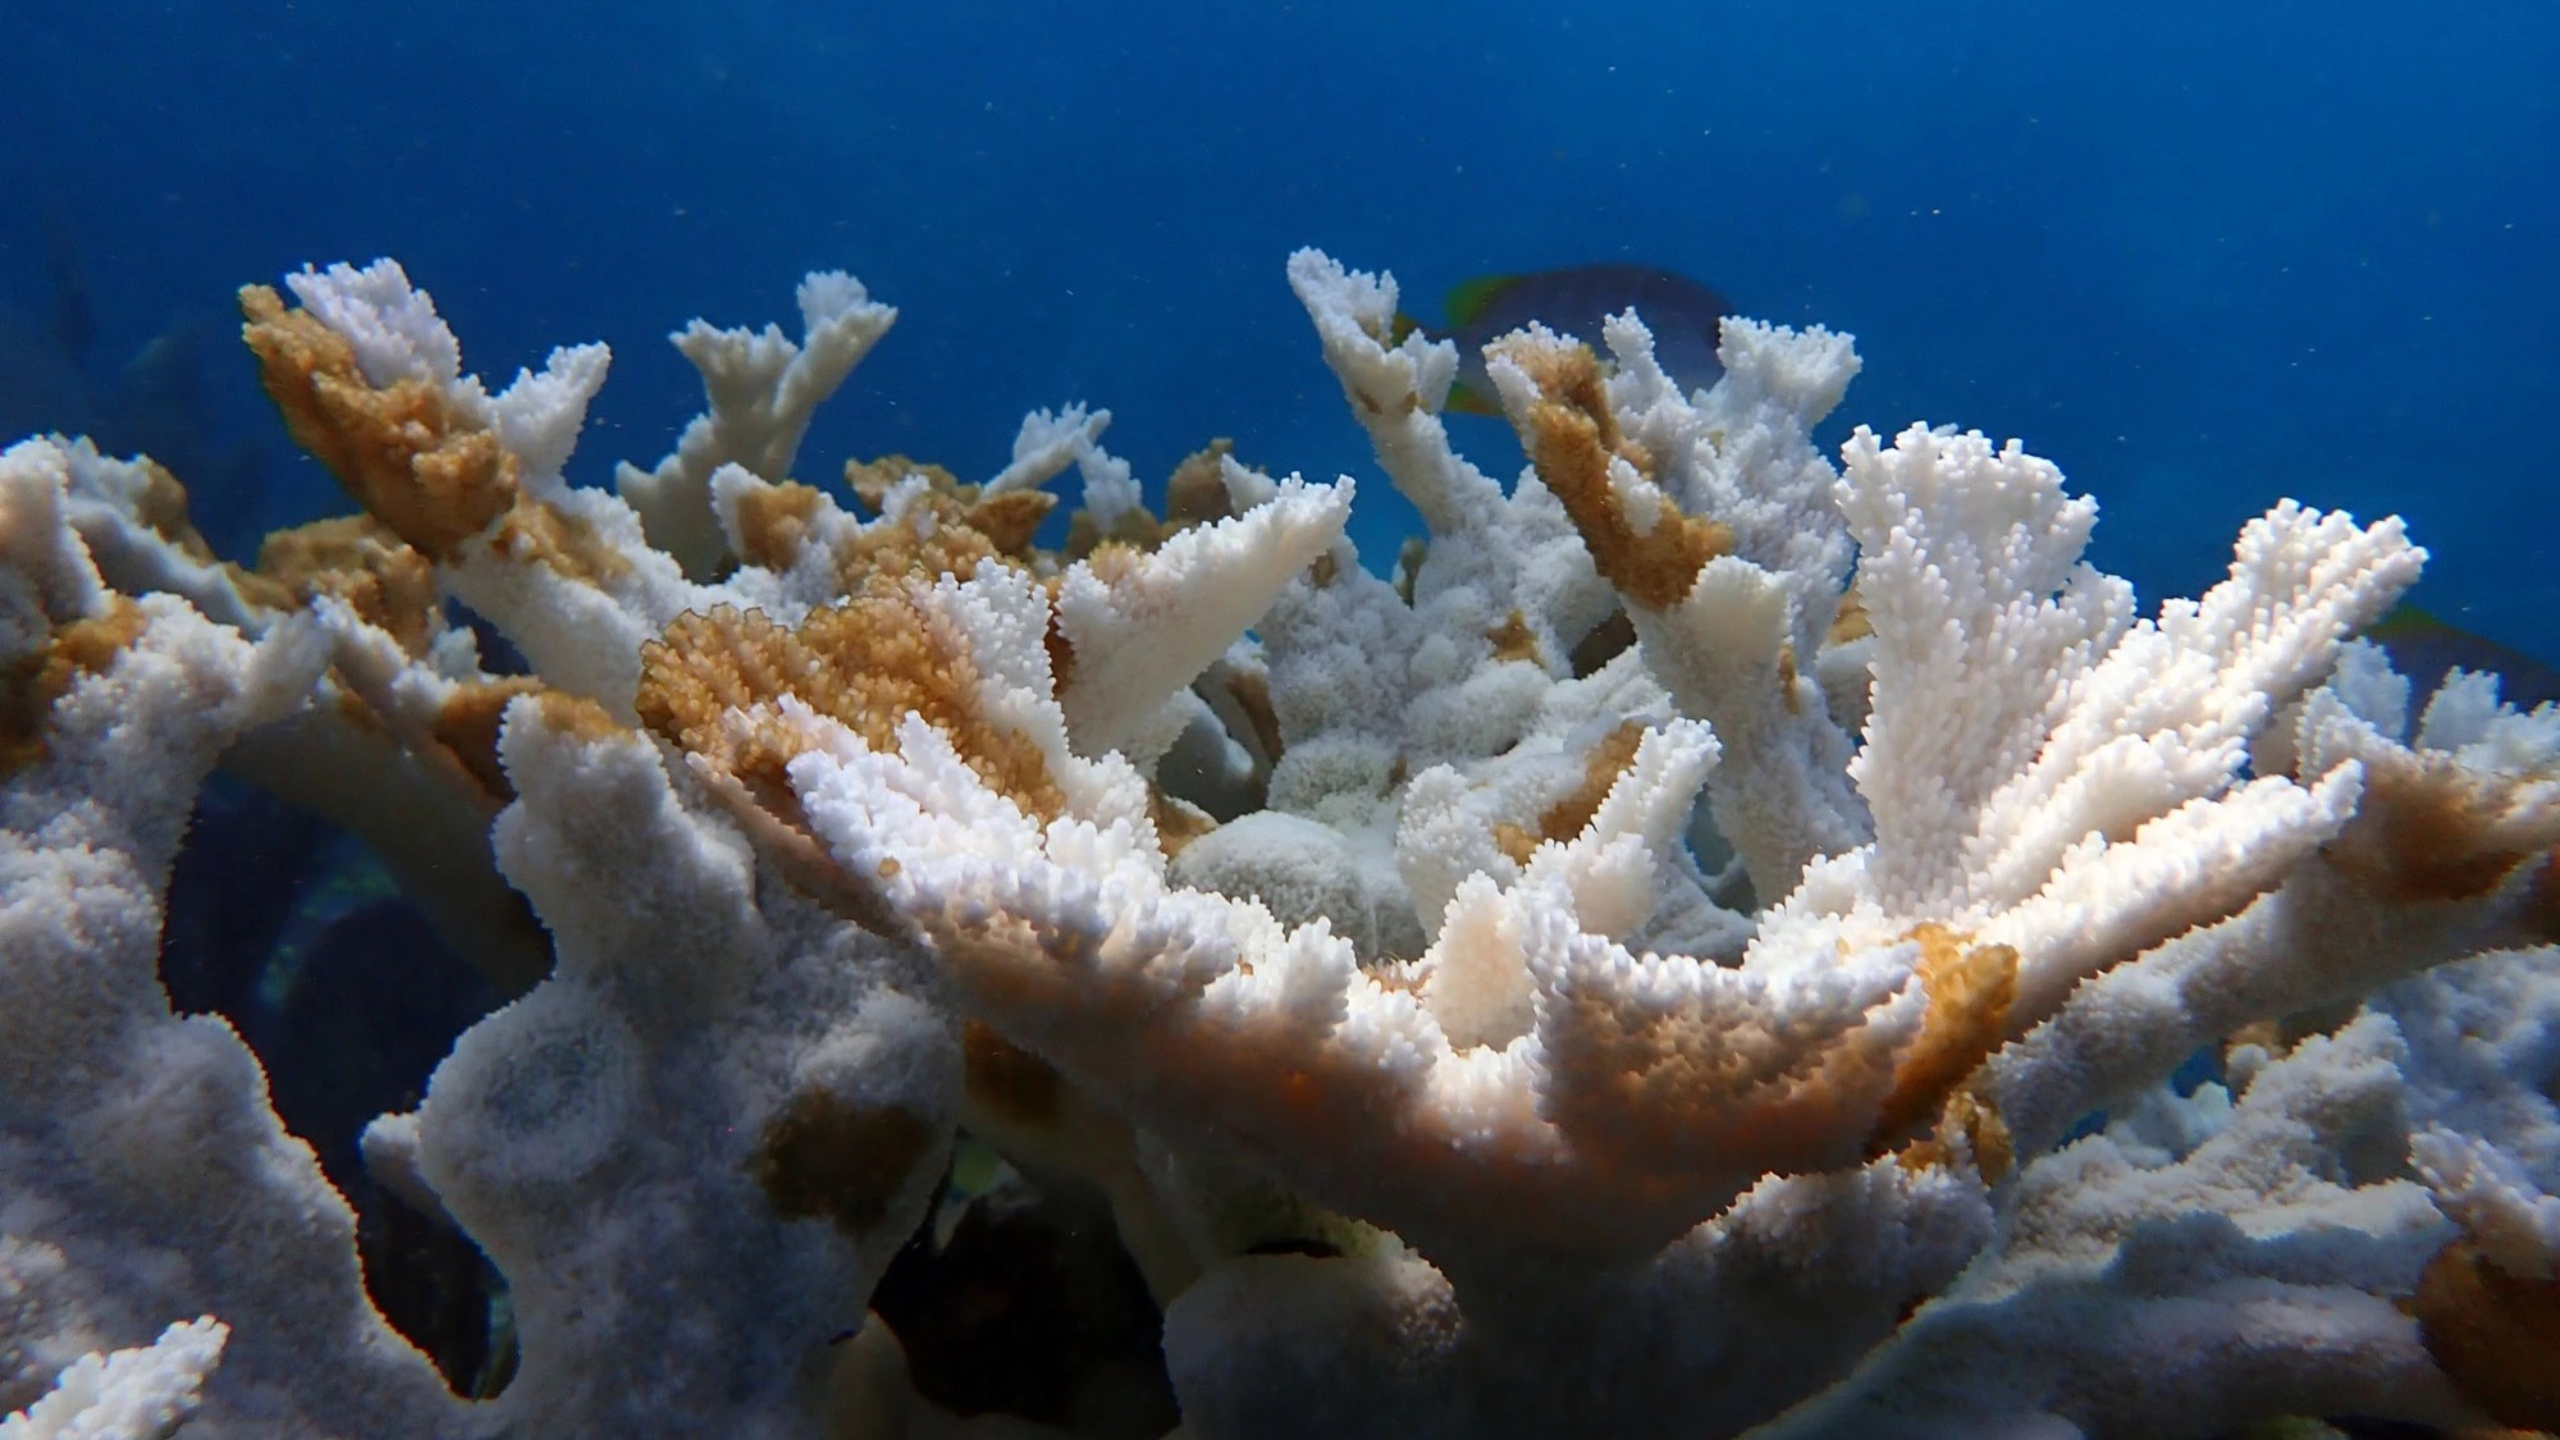 Dead elkhorn coral at Sombrero Reef in the Florida Keys. The white areas are bleached coral, the brownish orange patches are "tissue slough", coral tissue that has died before it has a chance to bleach.